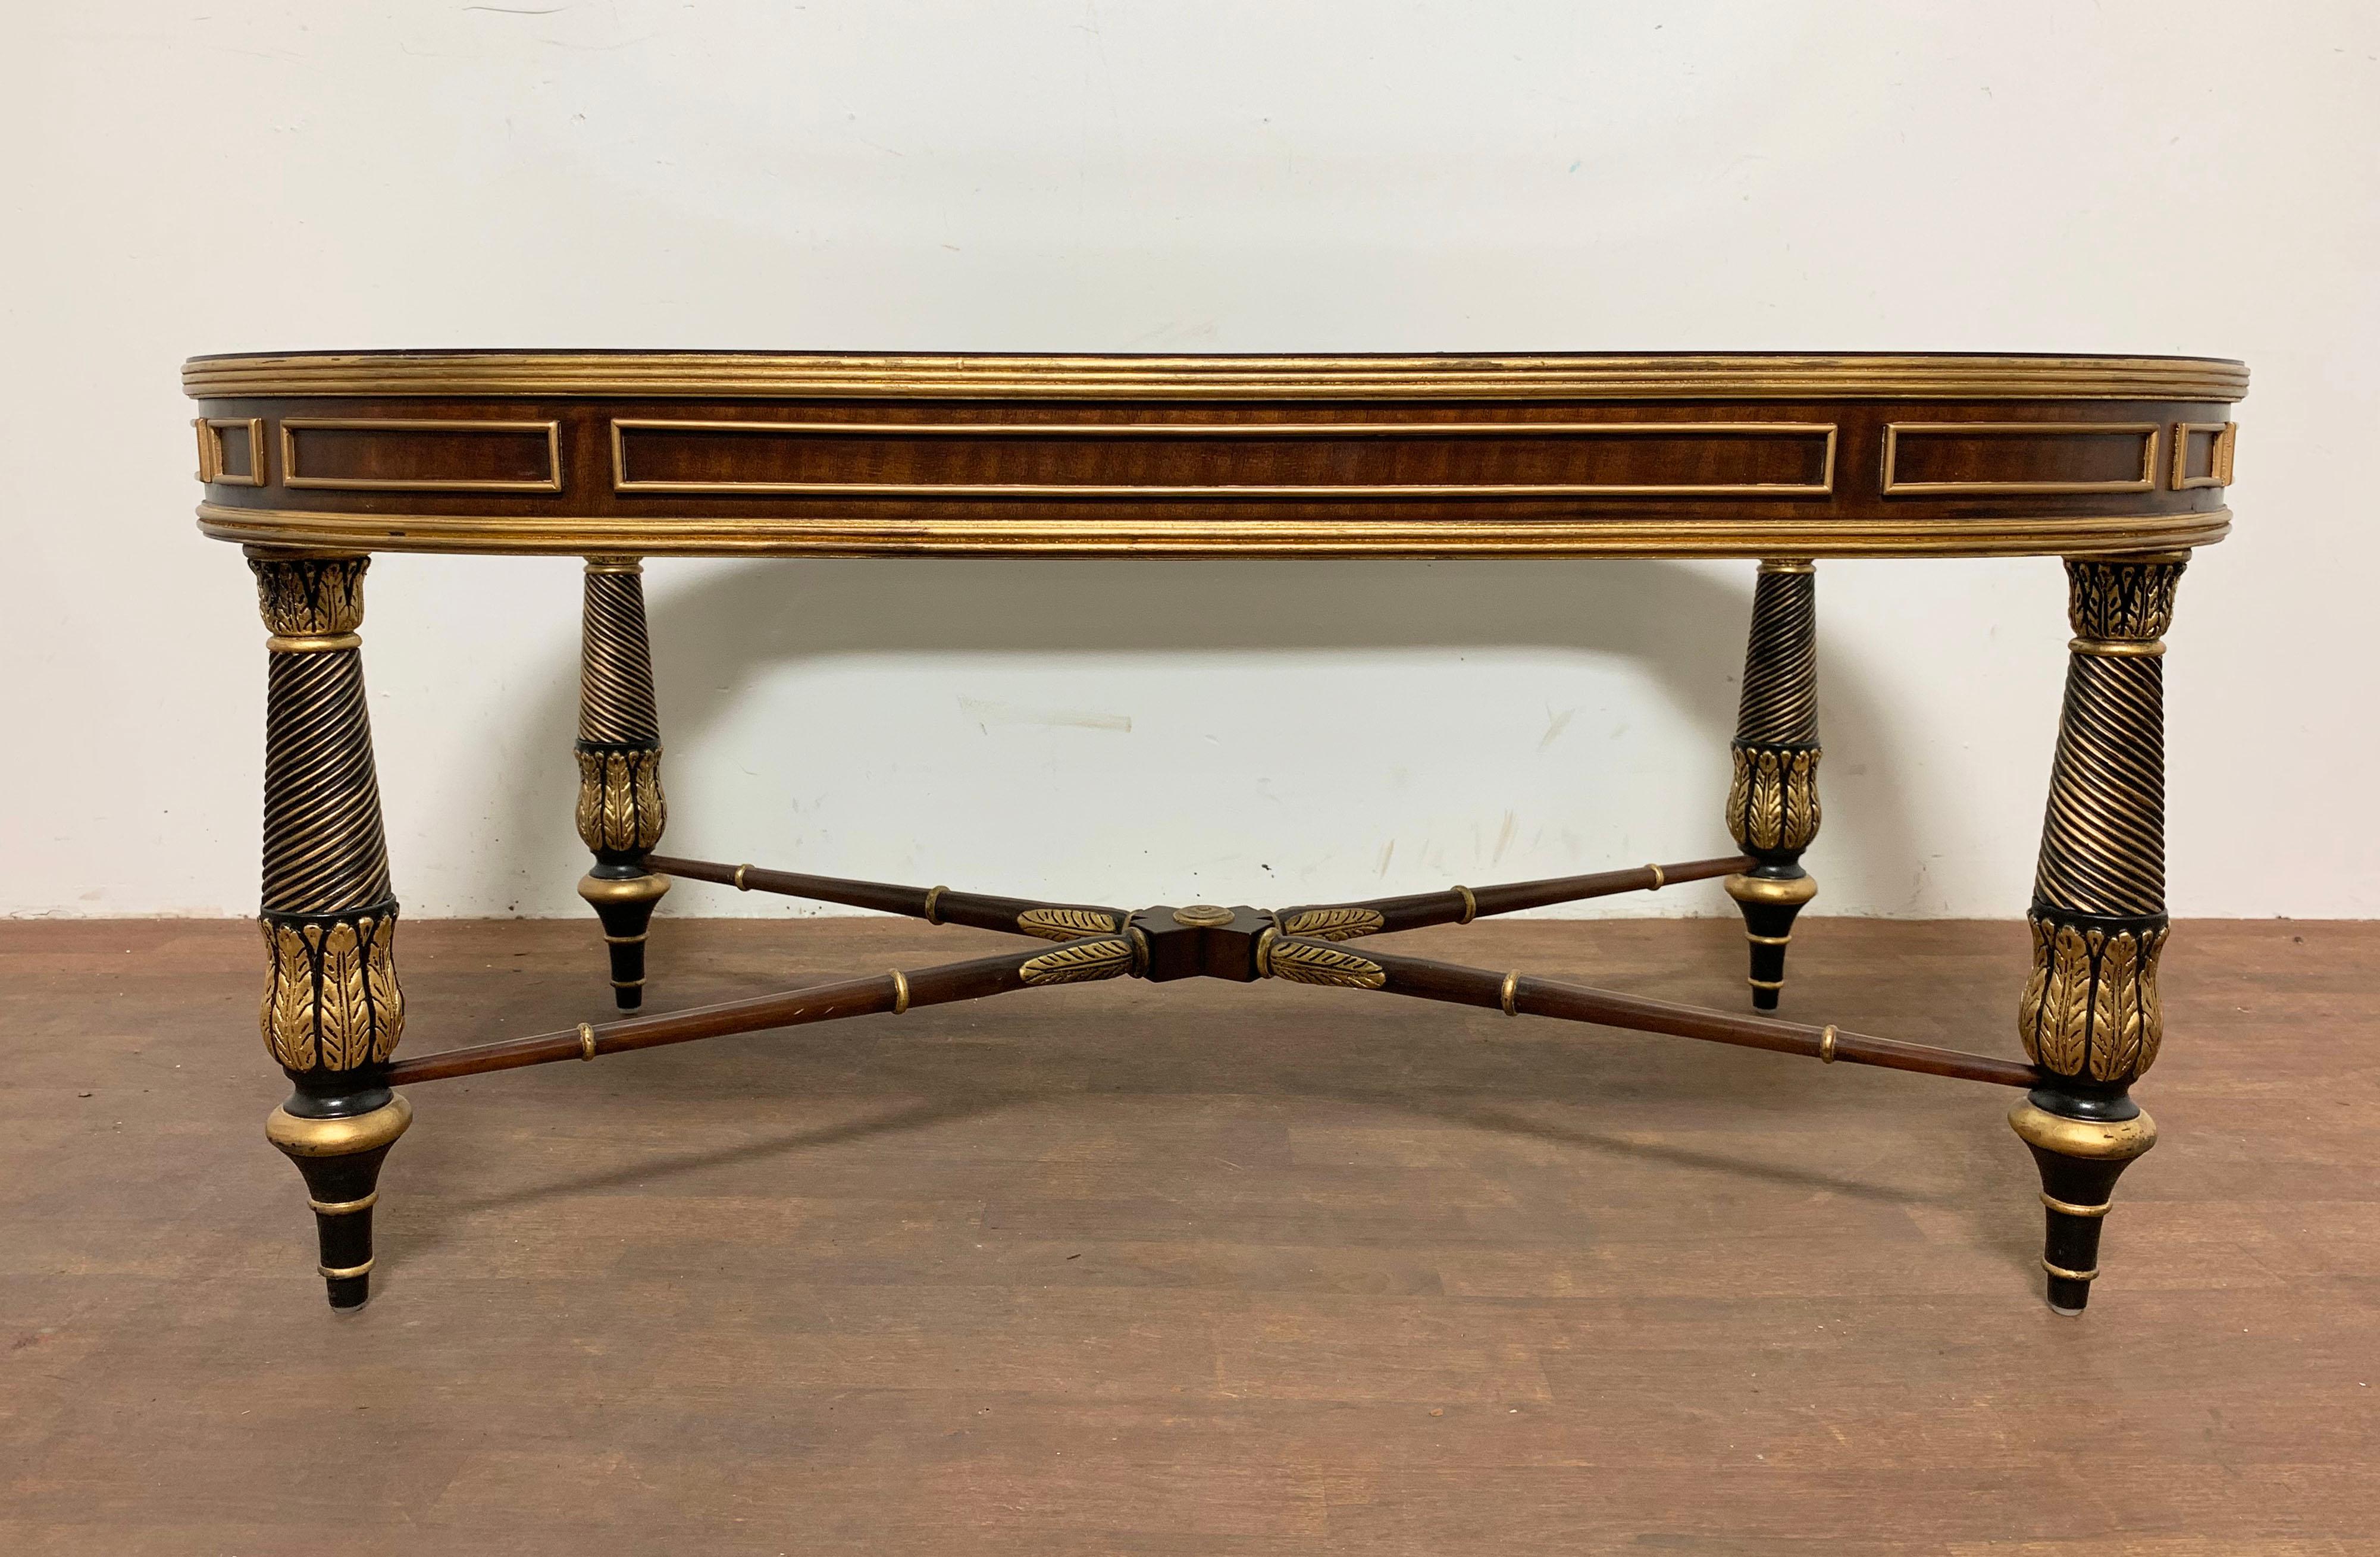 Regency style neoclassical form coffee table in mahogany with handcrafted details, gilded accents, and a beveled glass insert. By E.J. Victor Furniture of North Carolina, circa 2001.